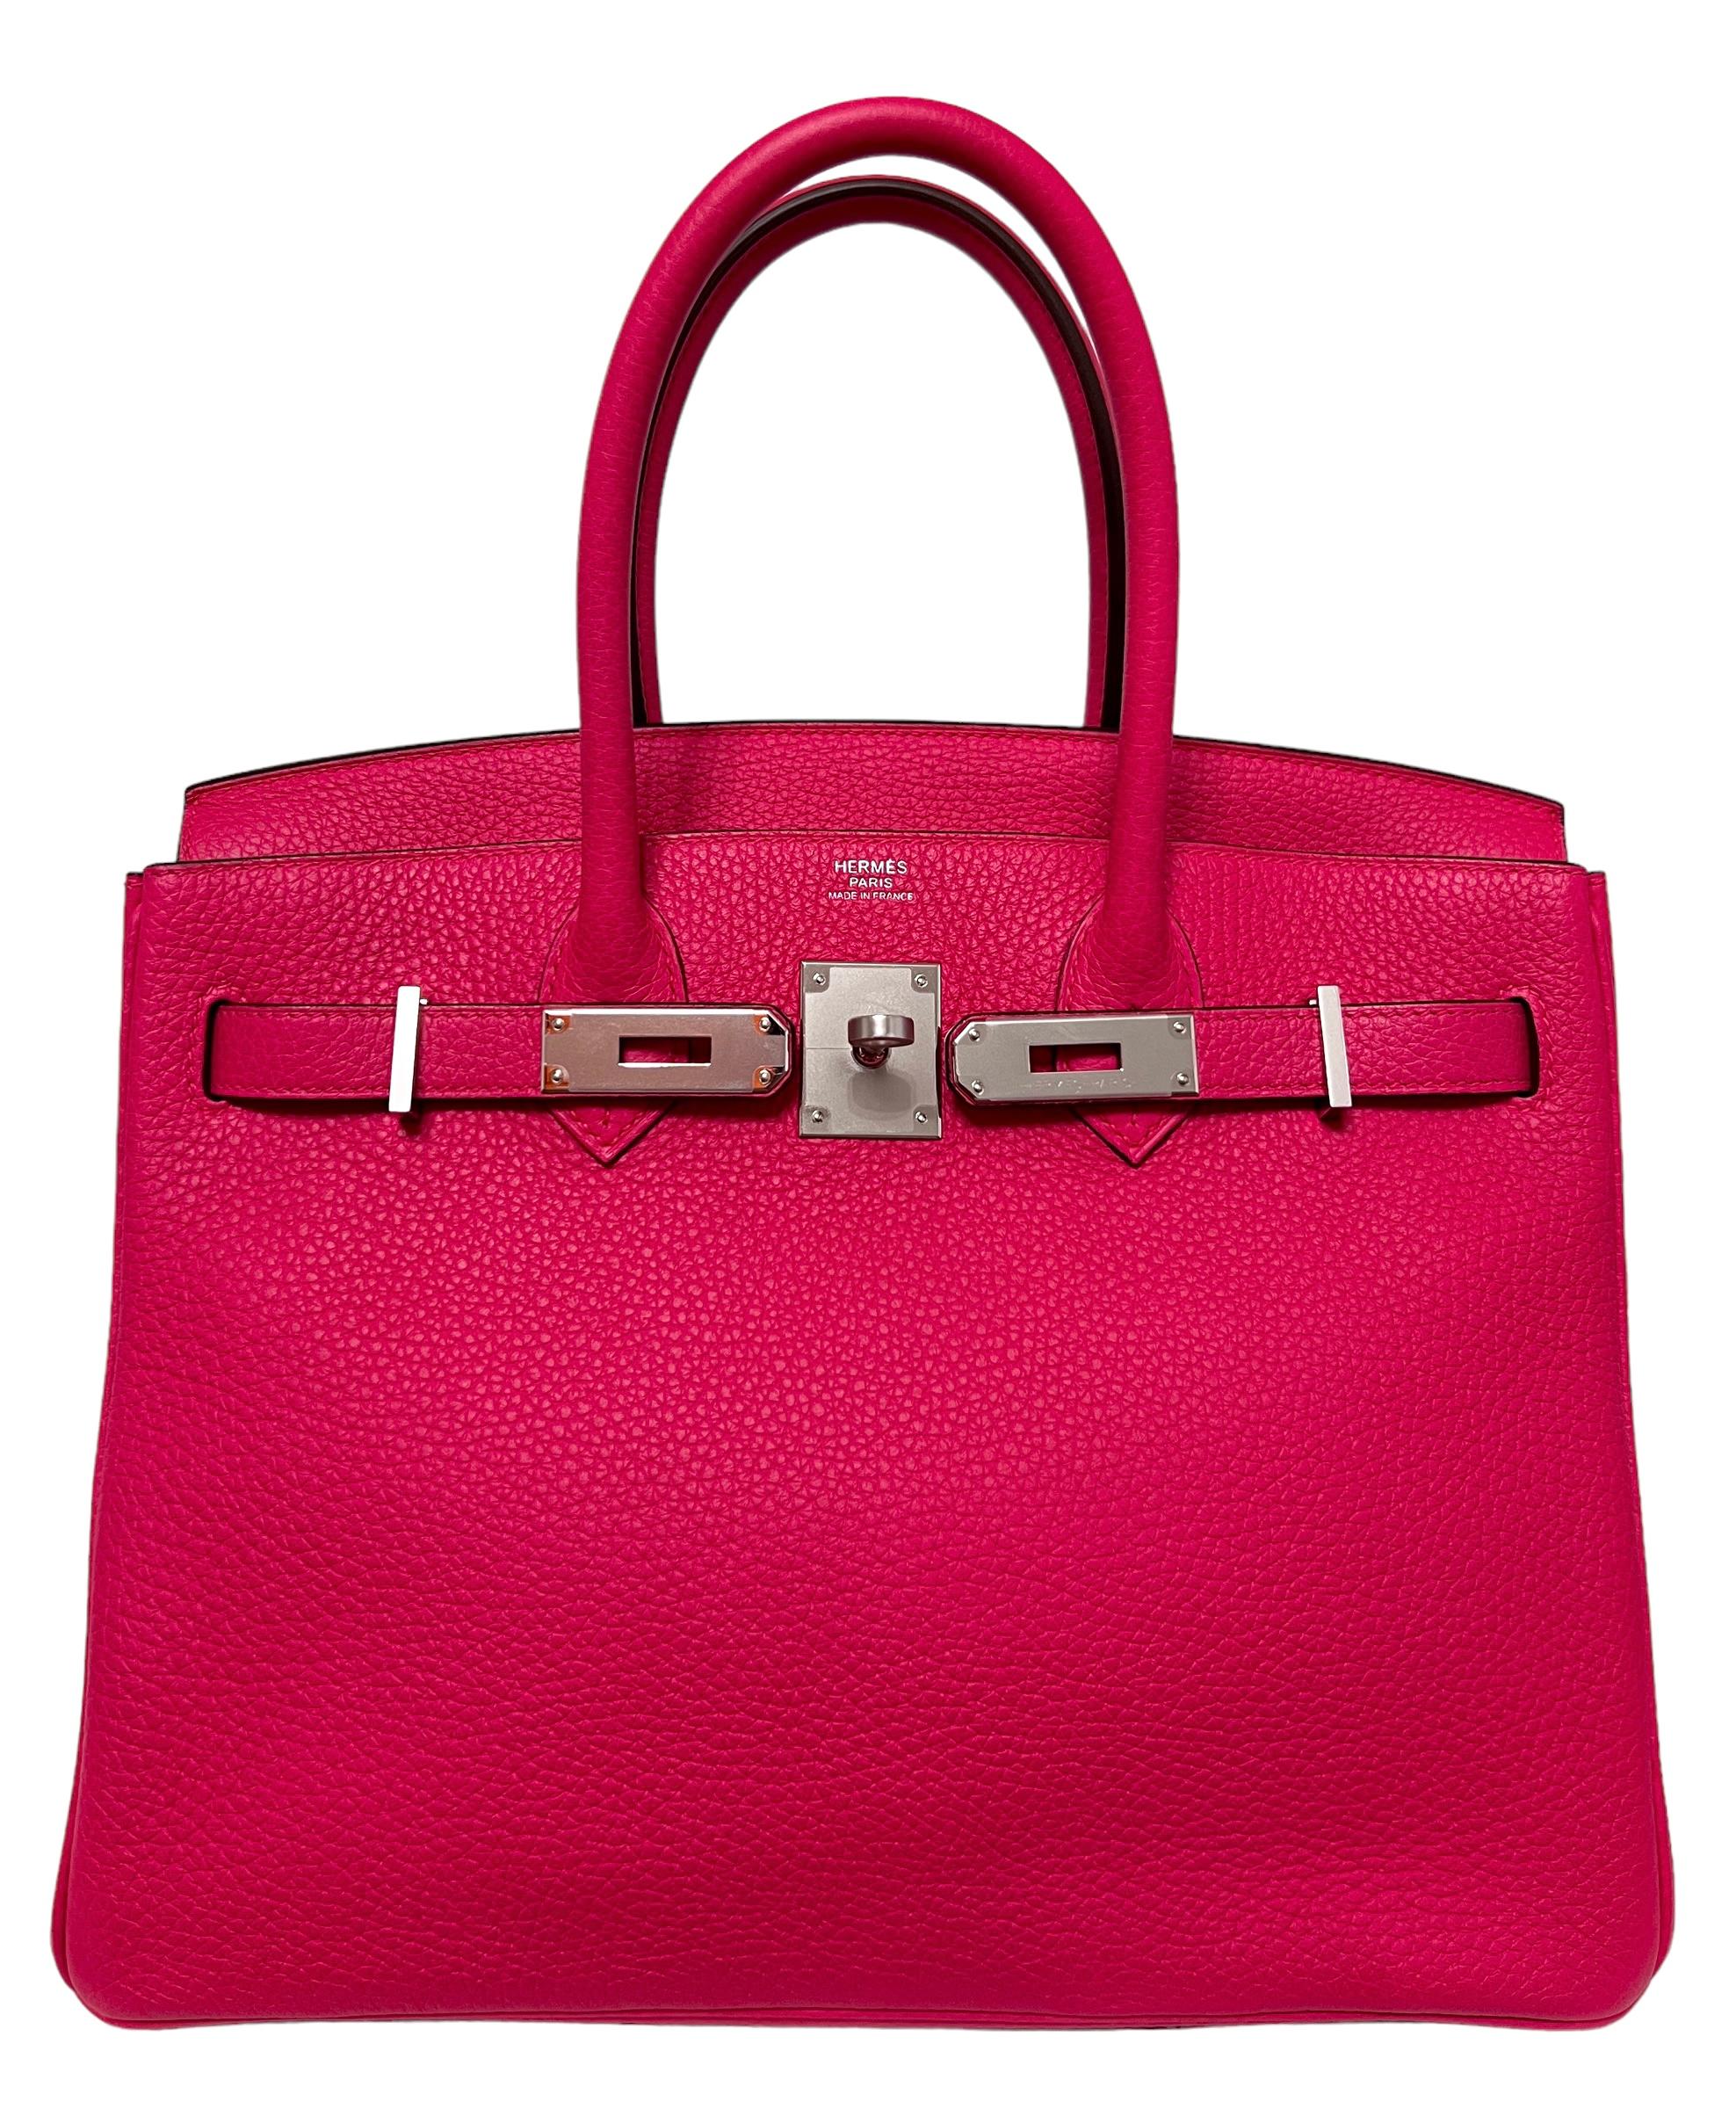 Hermes Birkin 30 Rose Extreme Pink Leather Palladium Hardware New  In New Condition For Sale In Miami, FL